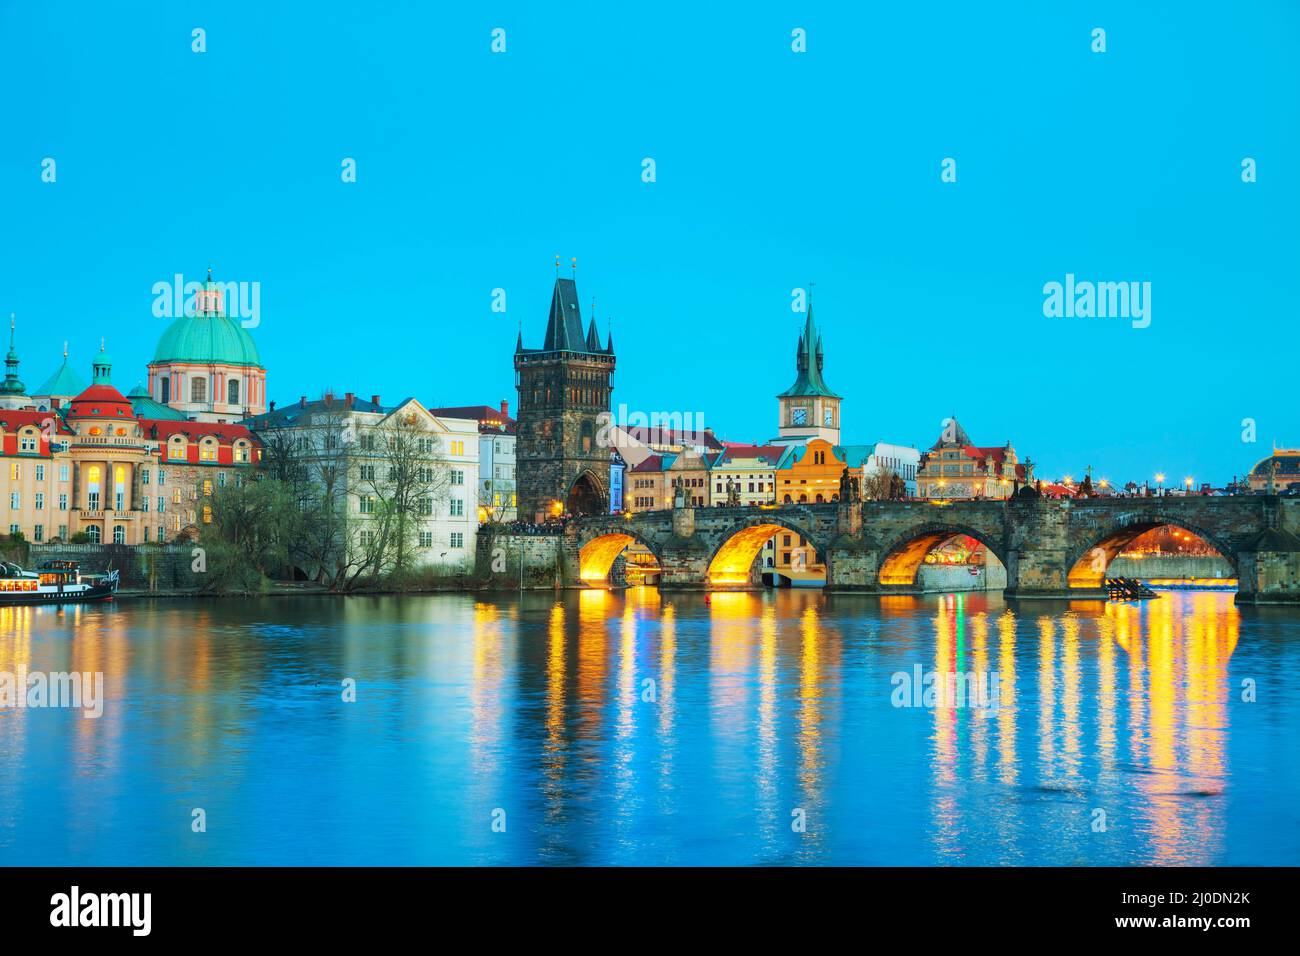 The Old Town Charles bridge tower in Prague Stock Photo